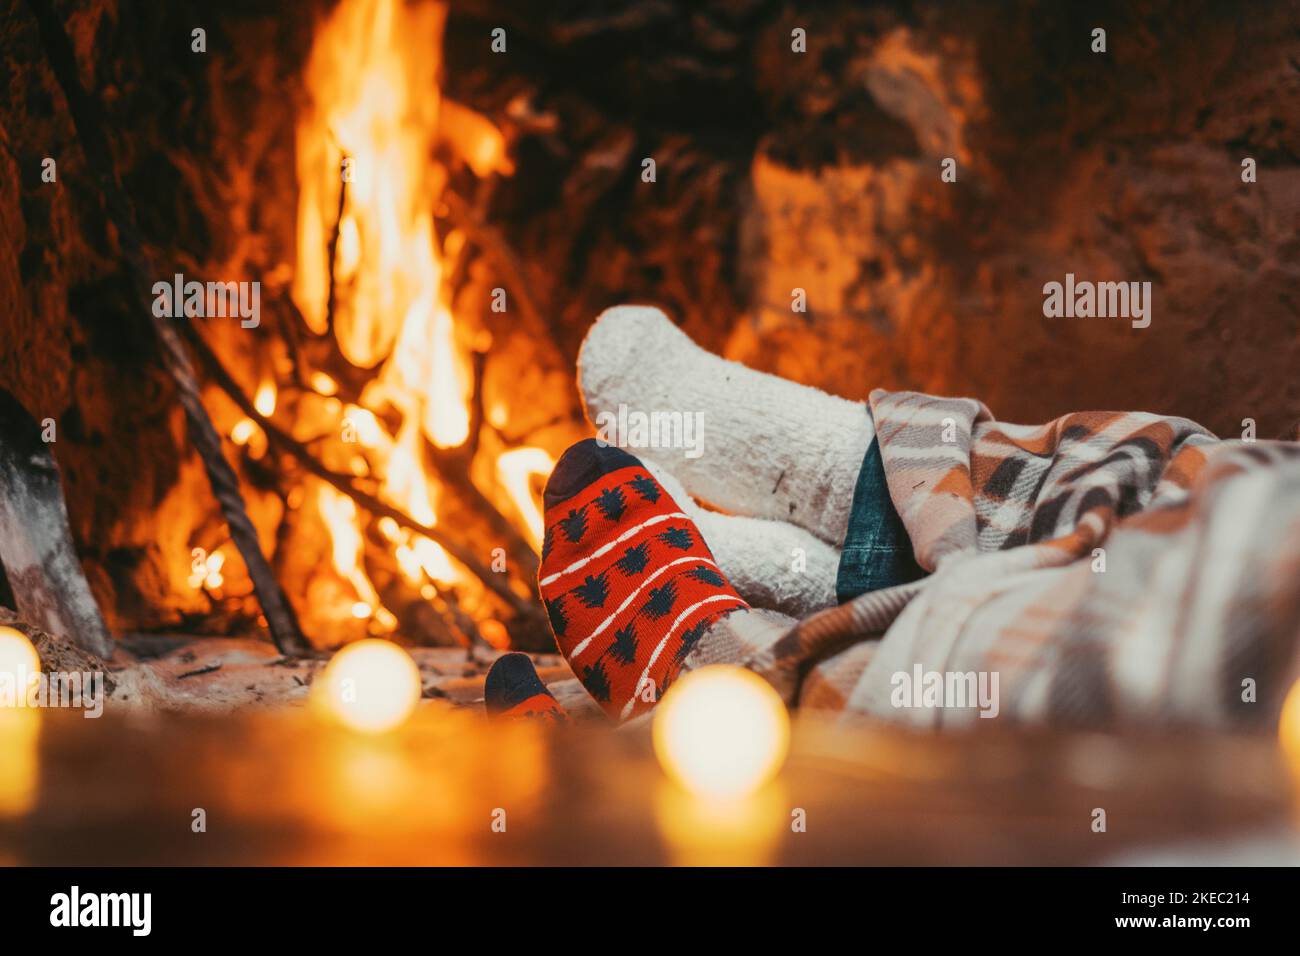 Low section legs of husband and wife covered in socks and warm blanket relaxing in front of burning fireplace during winter christmas holiday. Pair of feet in woollen socks by the Christmas fireplace Stock Photo